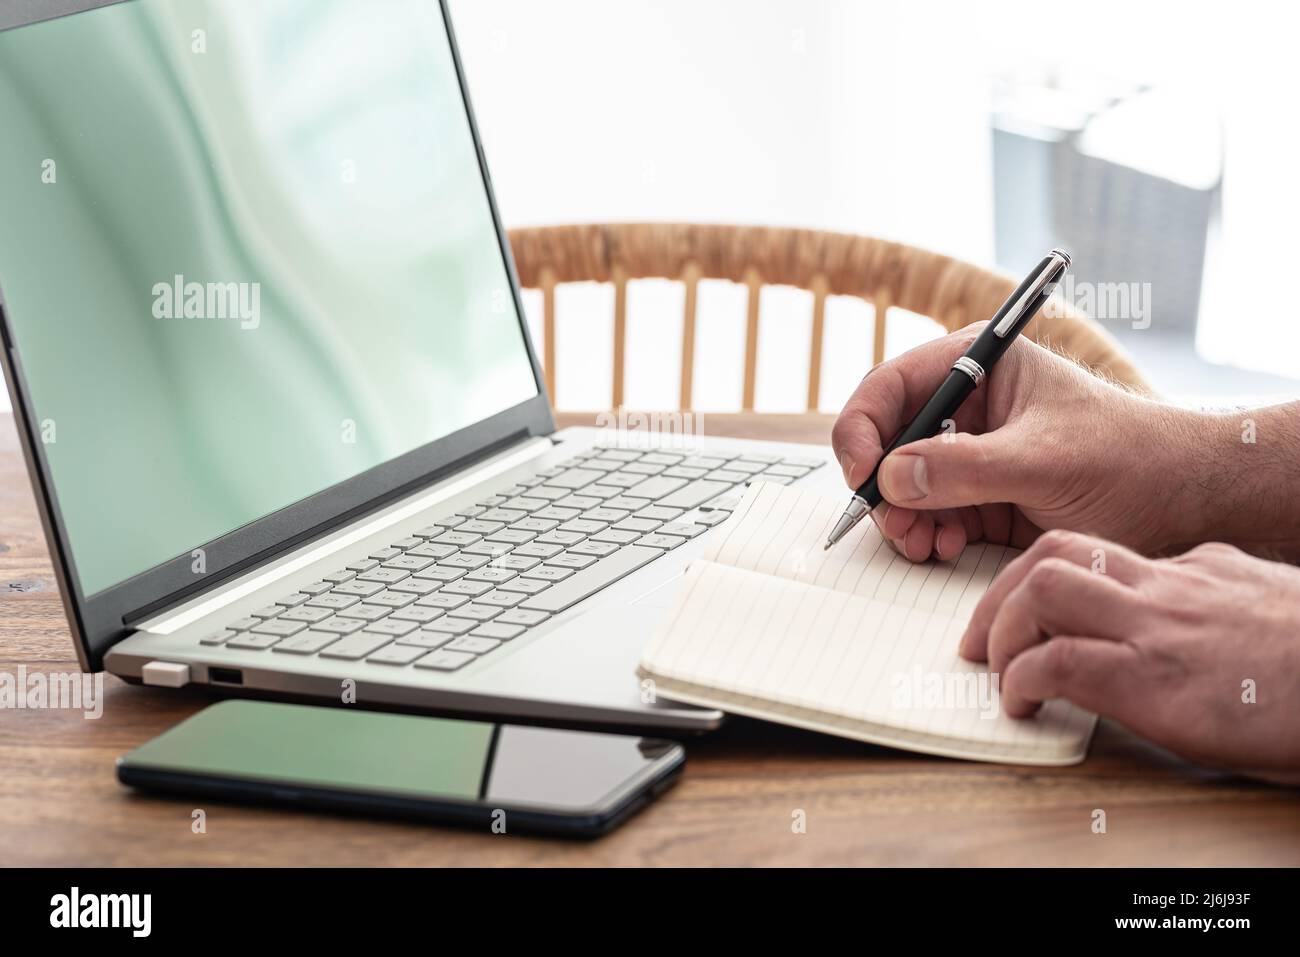 man taking notes on paper while using laptop computer, e-learning or working from home concept Stock Photo